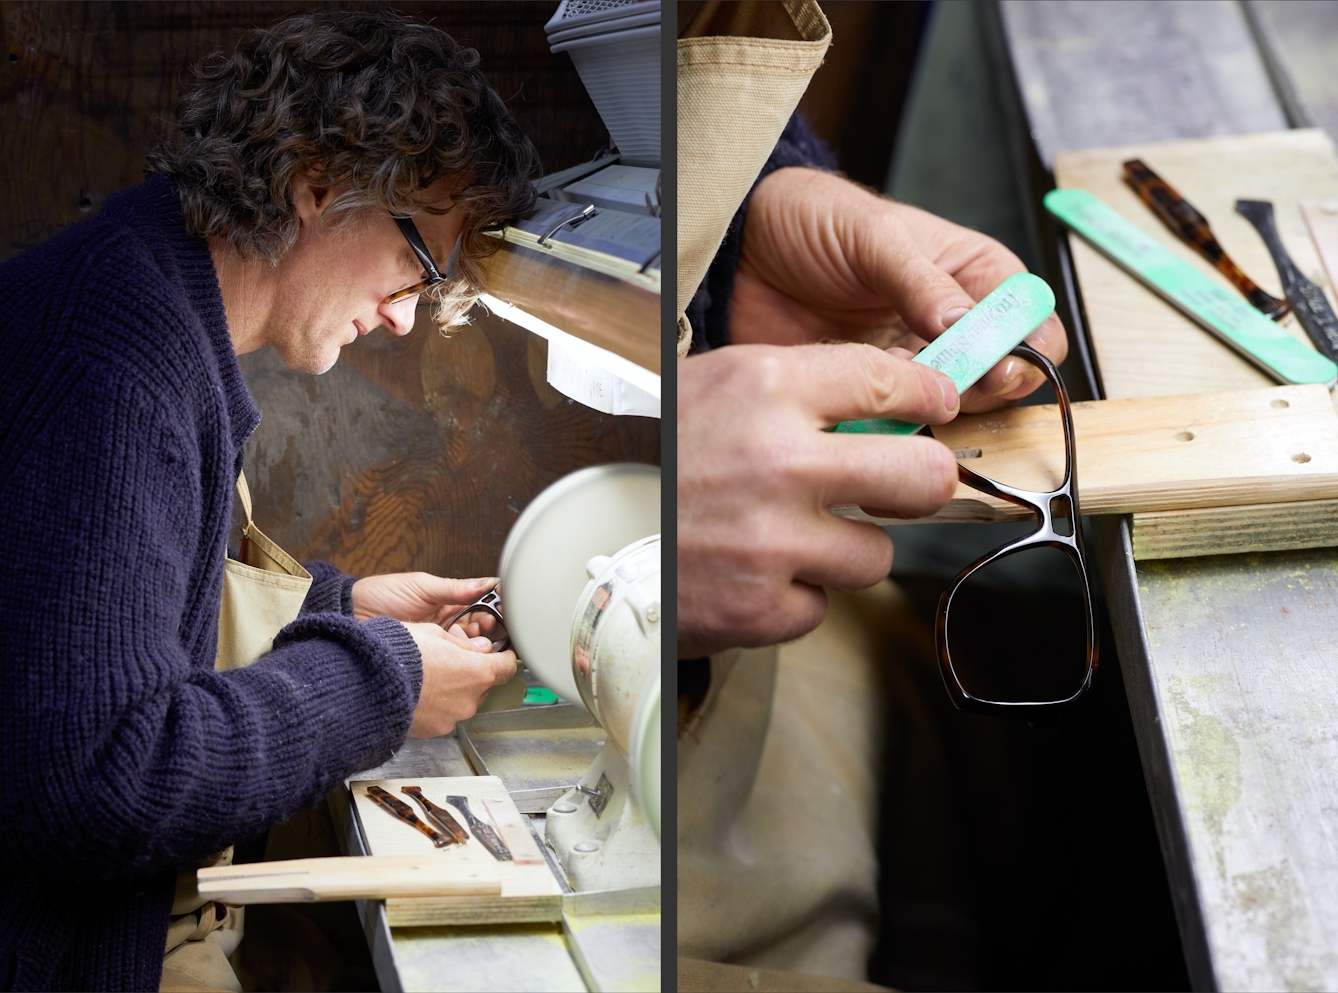 Photographic diptych. The image on the left shows a man in a blue knitted top bent over a polishing machine. He is using the machine to polish the component parts of a pair of spectacles. The image on the right shows the hands of the same man close up as he uses a flat file to smooth parts of the spectacle frame.